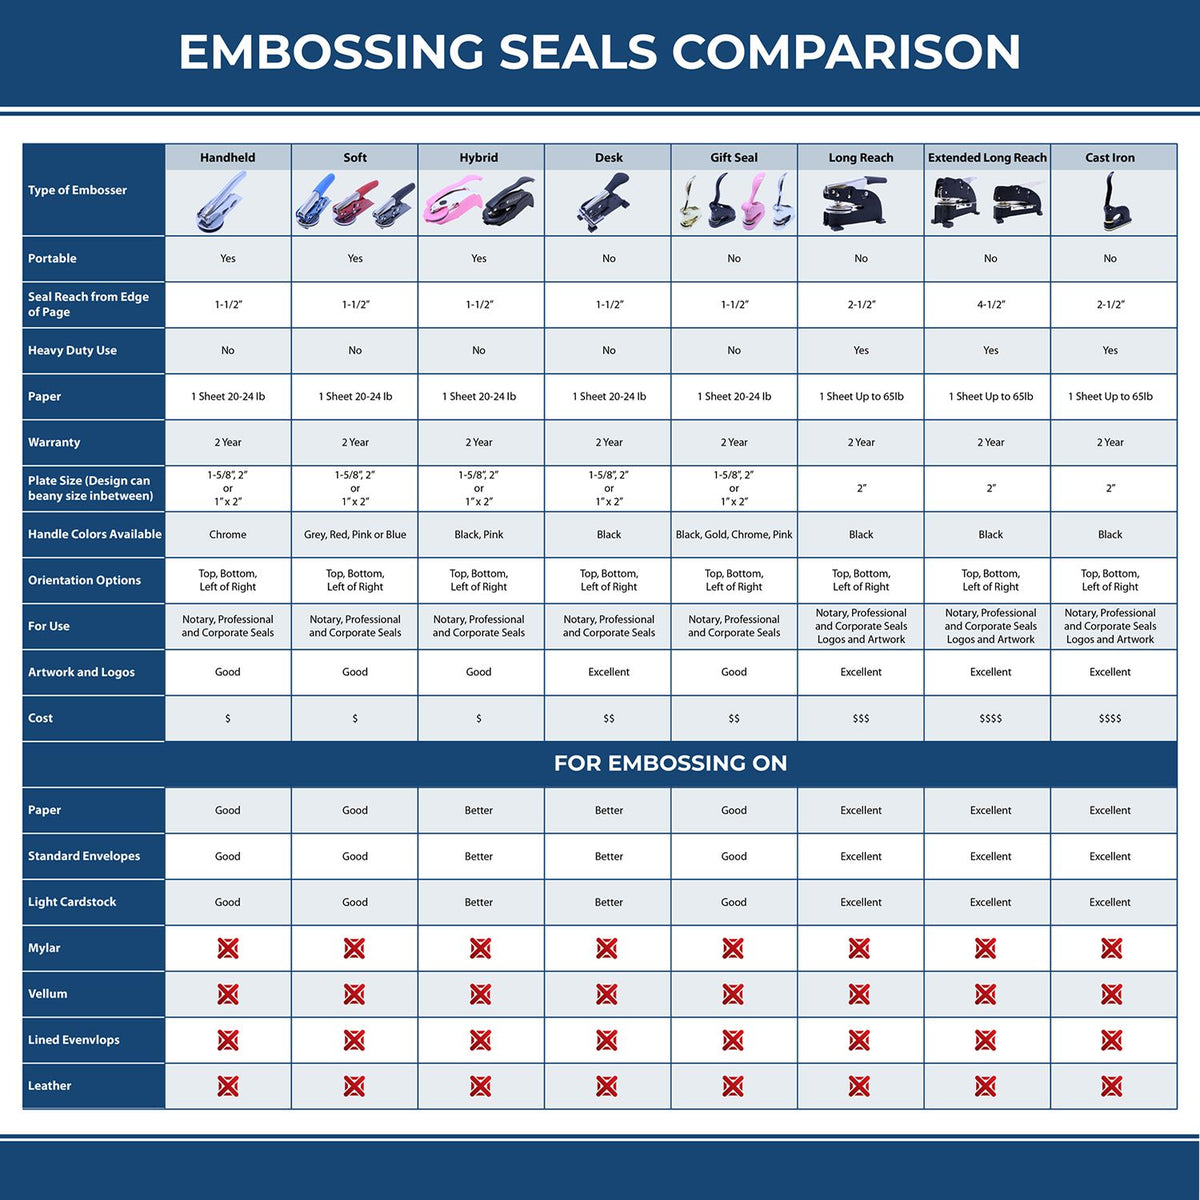 A comparison chart for the different types of mount models available for the Handheld Nebraska Architect Seal Embosser.